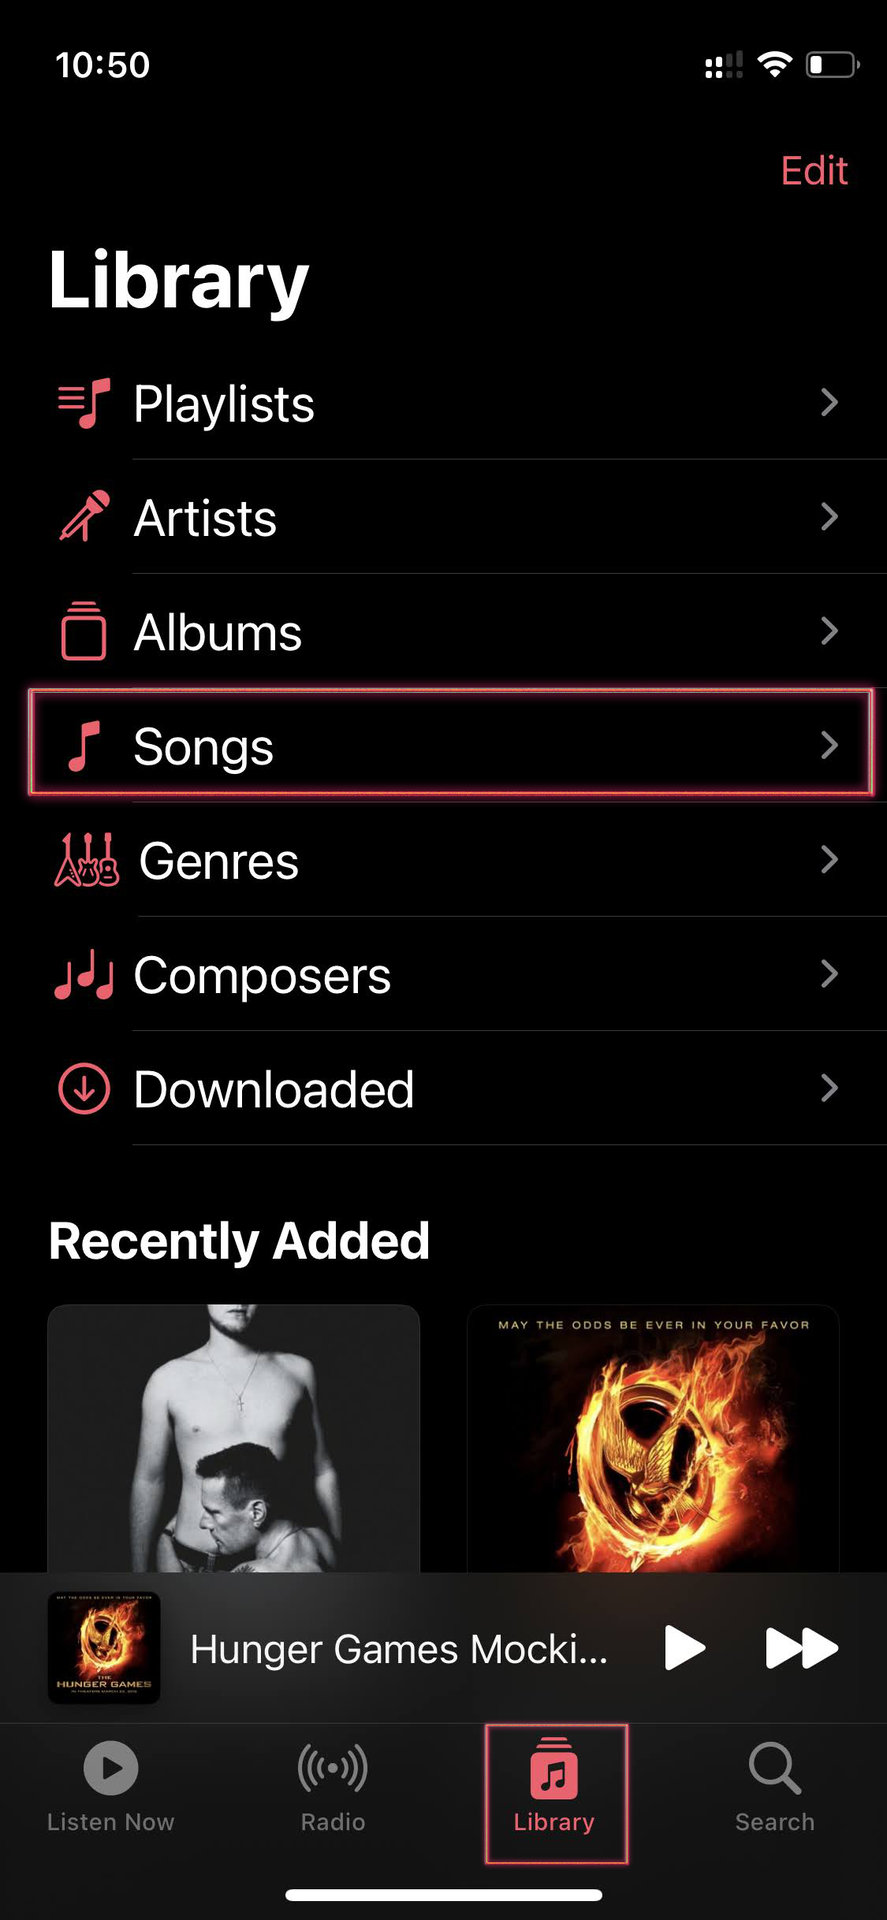 Download music on Apple Music with an iPhone 1